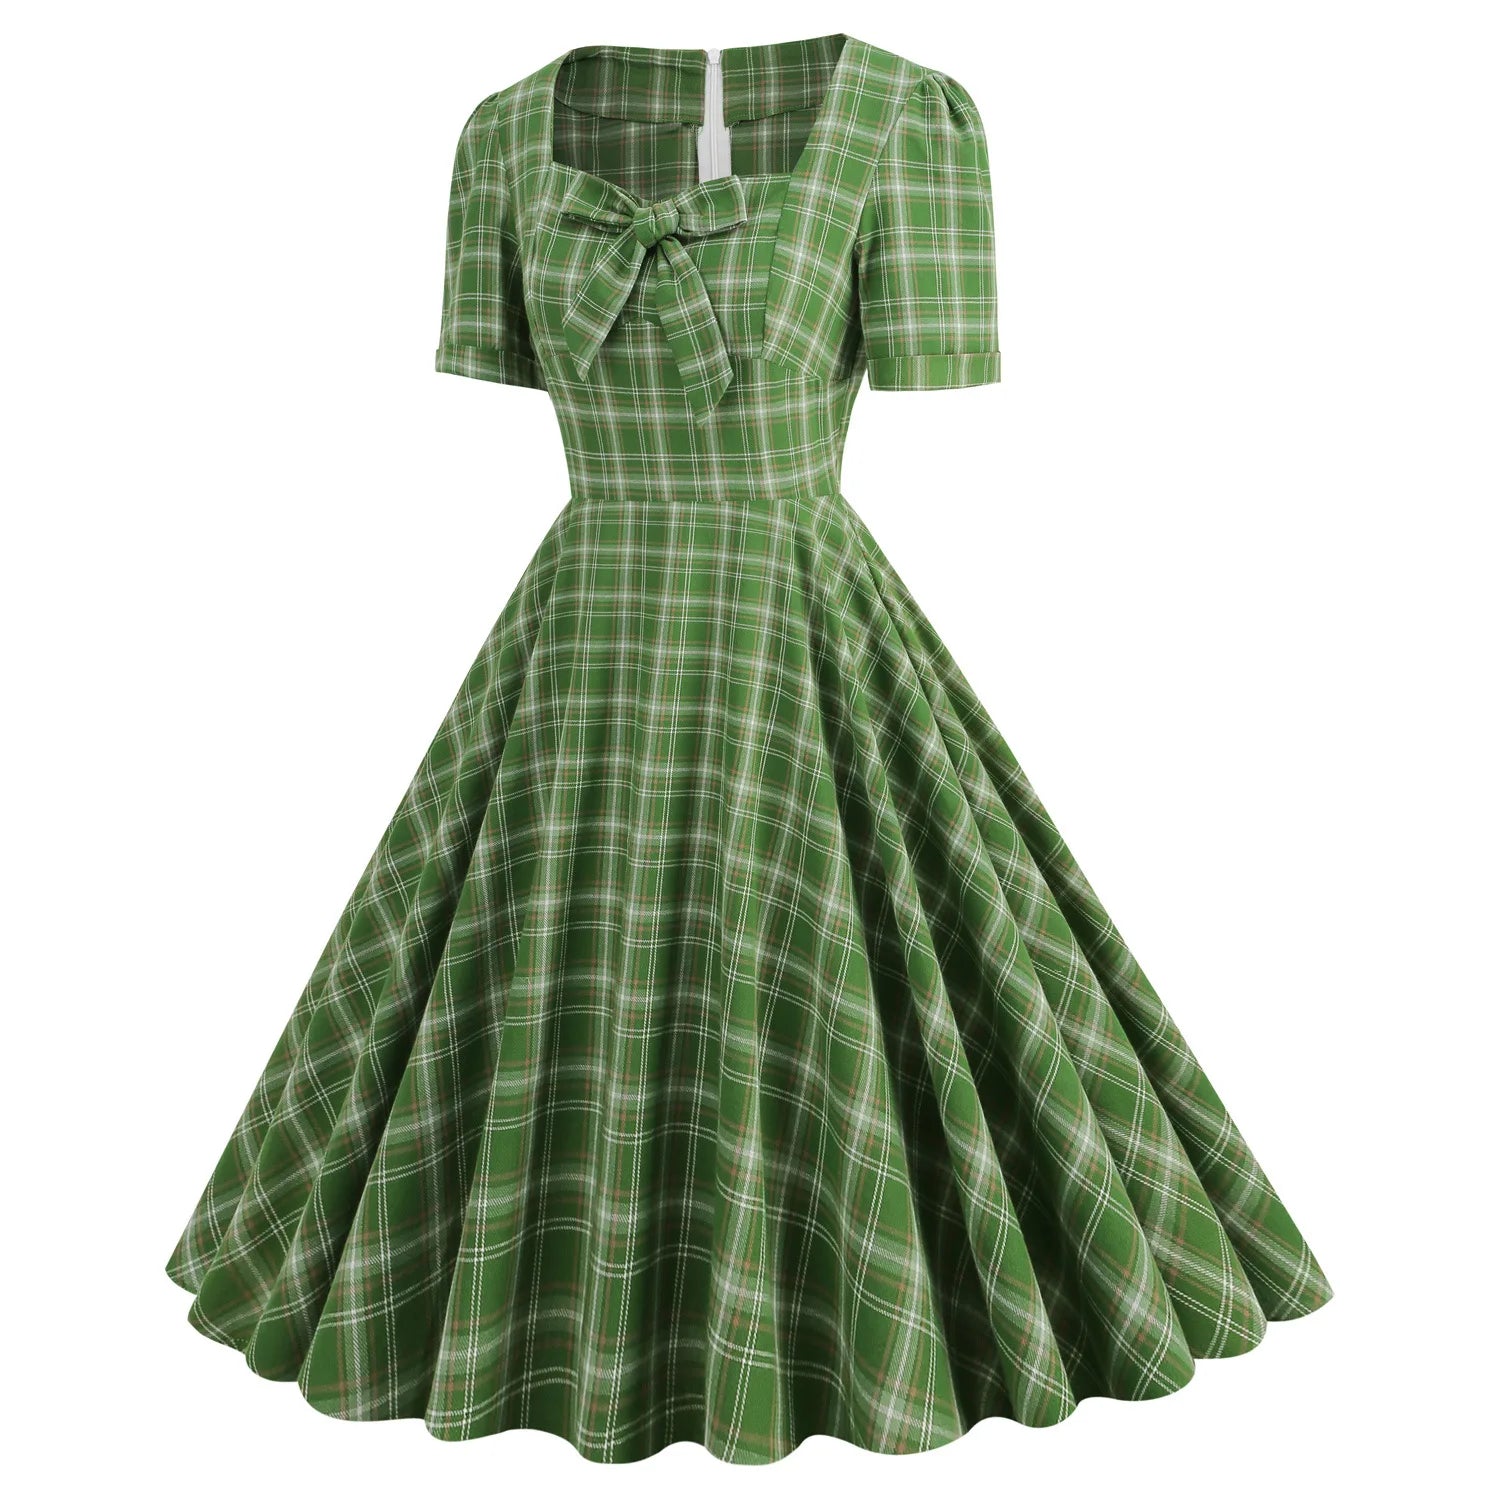 England Style Casual Vintage Short Sleeve Square Neck Bow 50s Pinup Swing Dress